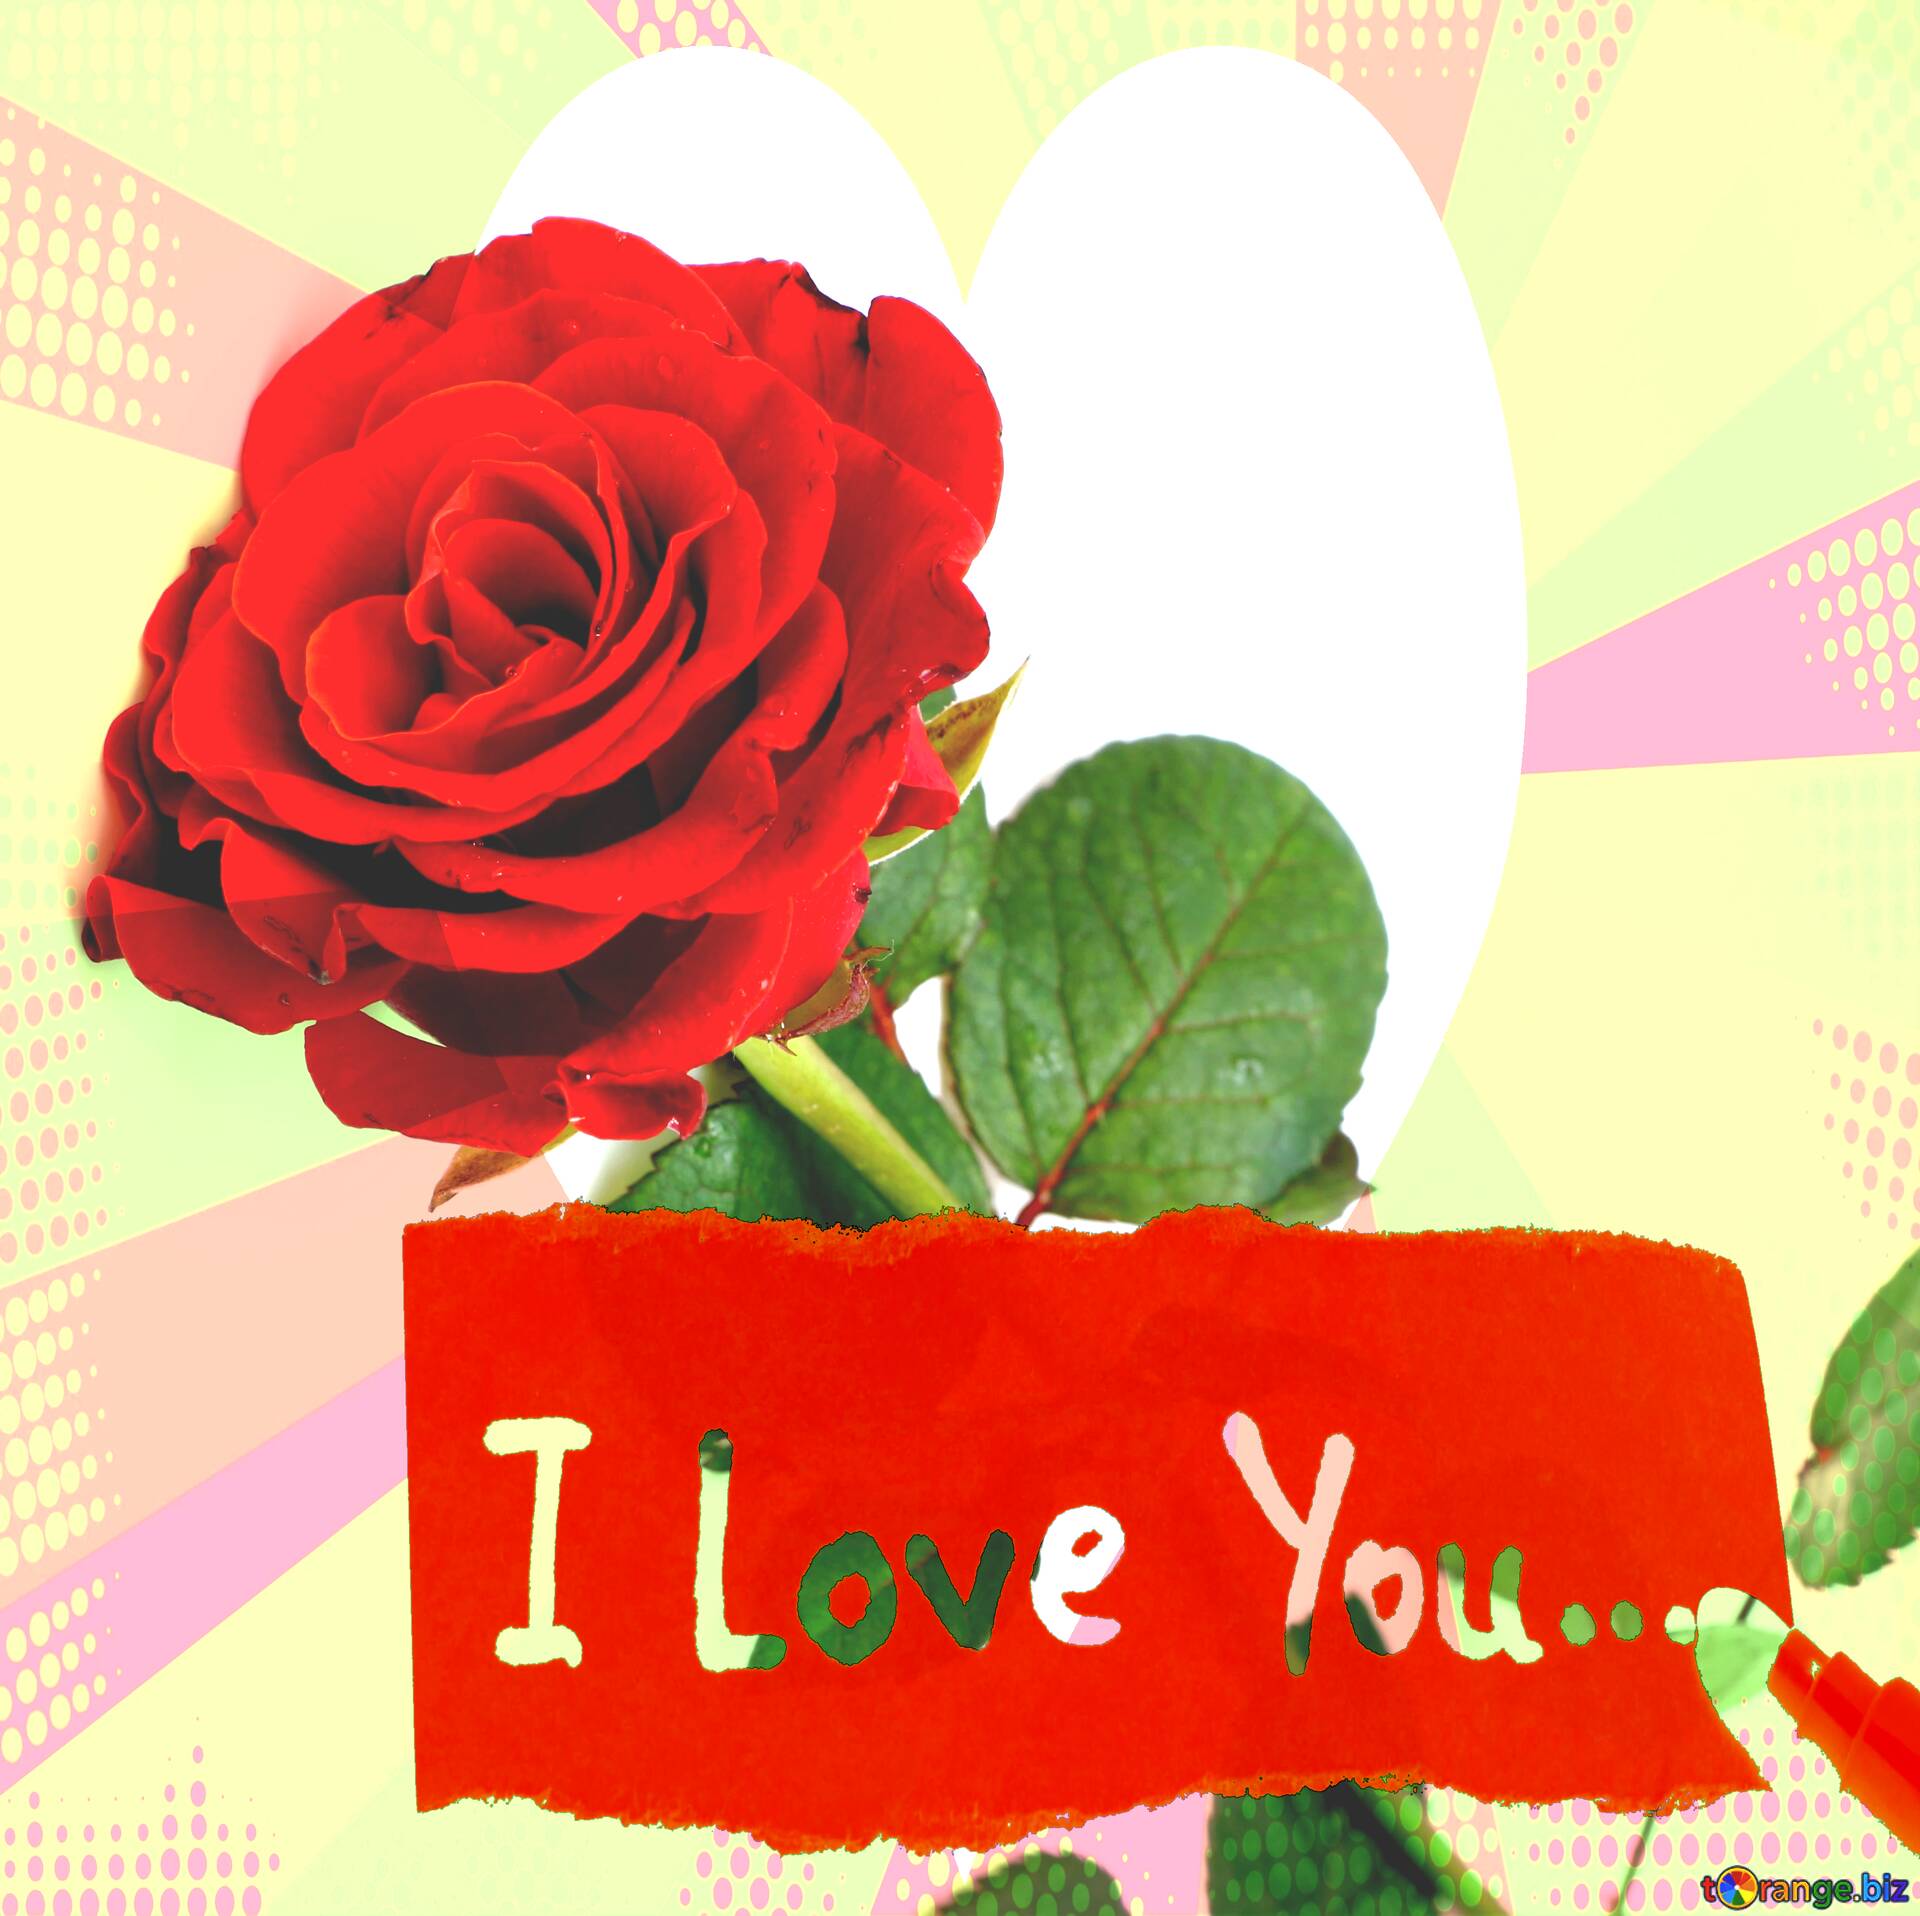 Download Free Picture Retro Style I Love You Card With Rose Flower On Cc By License Free Image Stock Torange Biz Fx